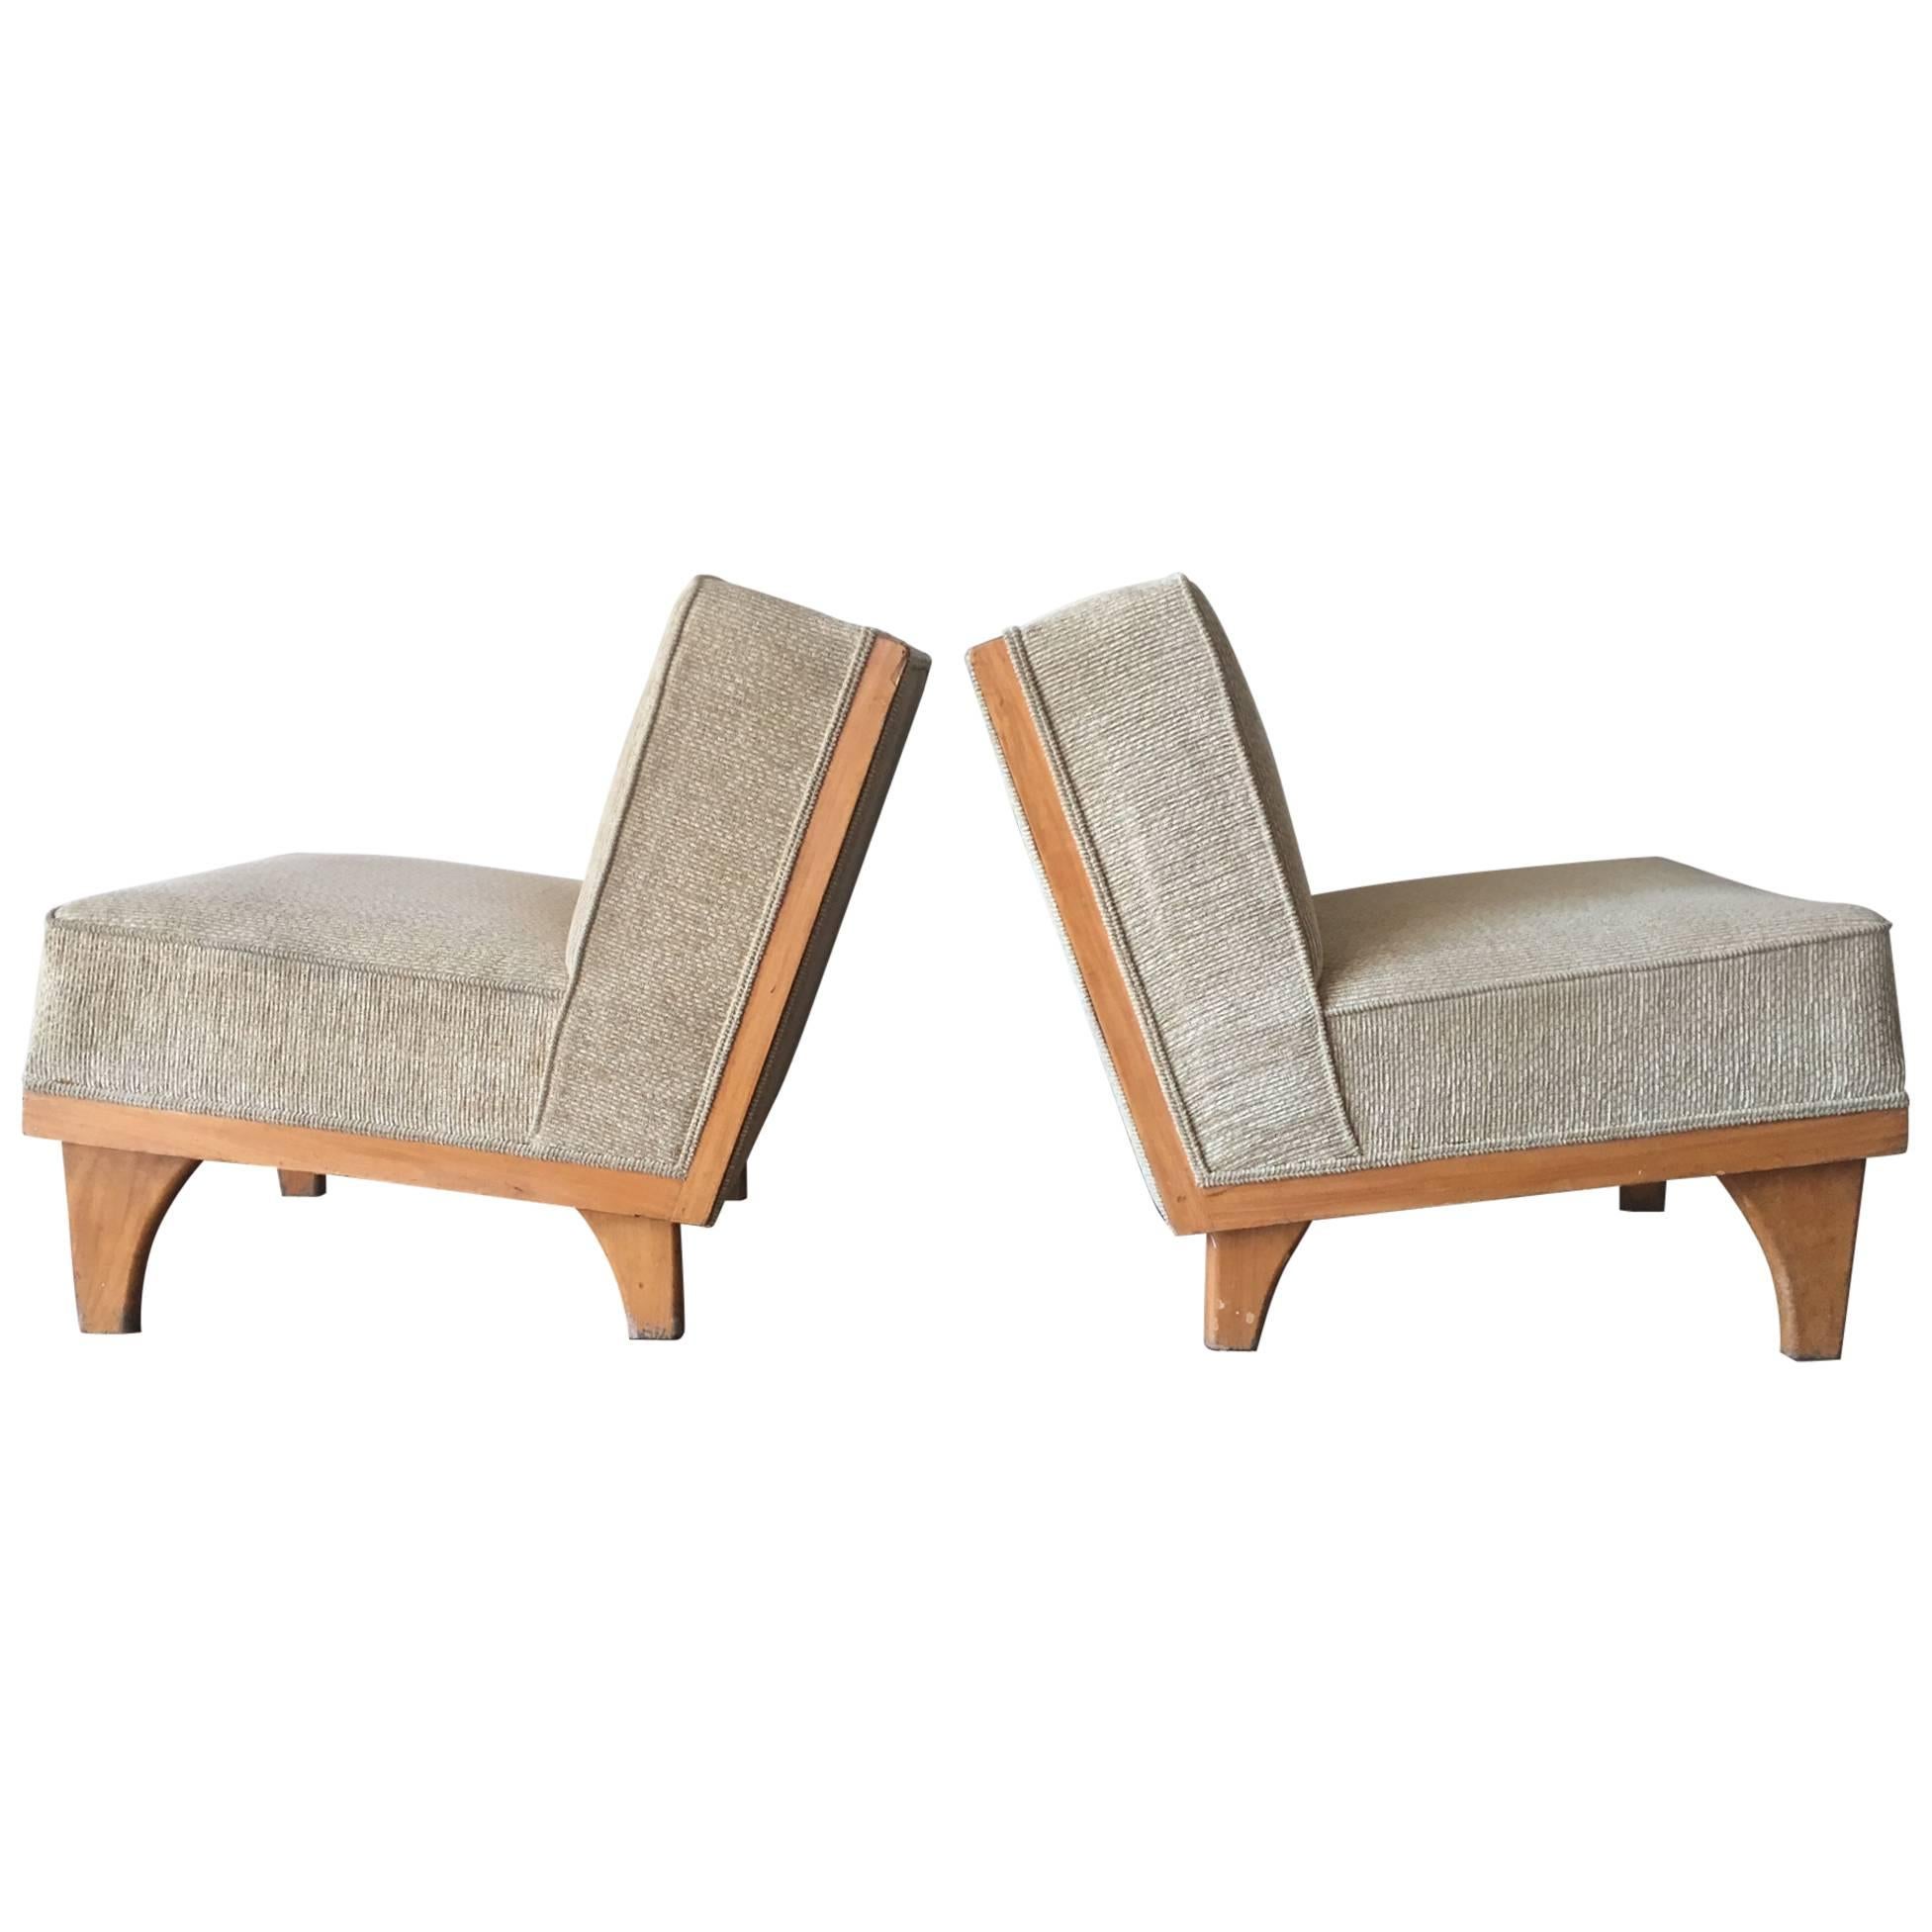 Very Rare Michael Van Beuren Lounge Chairs for Domus, Mexico, 1950s